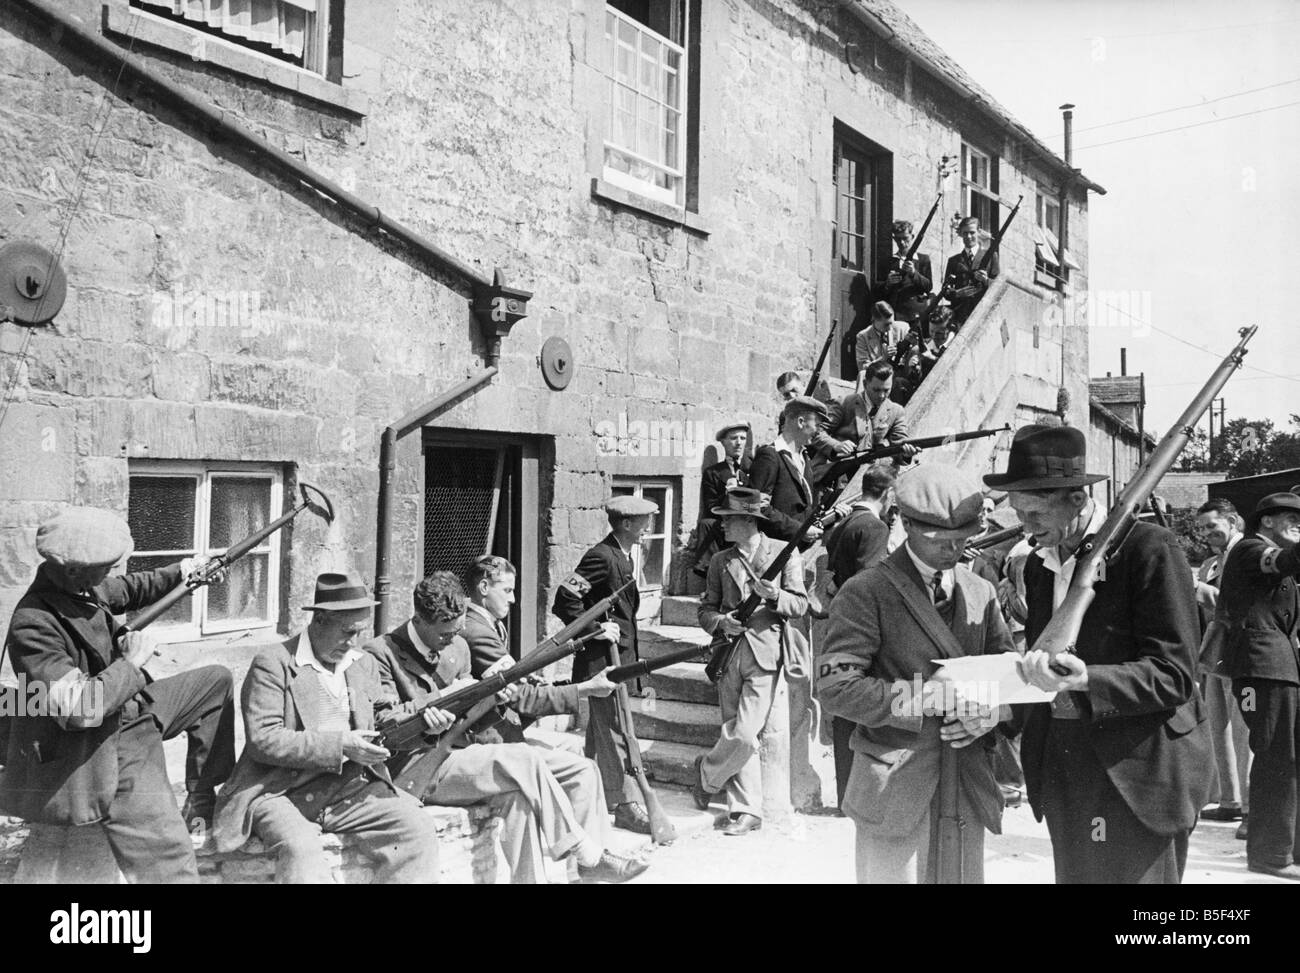 Defence of the Homeland. Parashooters aged 17-72 meet in the ancient market hall to organise which parts of the countryside they will be covering as look-outs.;3rd July 1940. Stock Photo